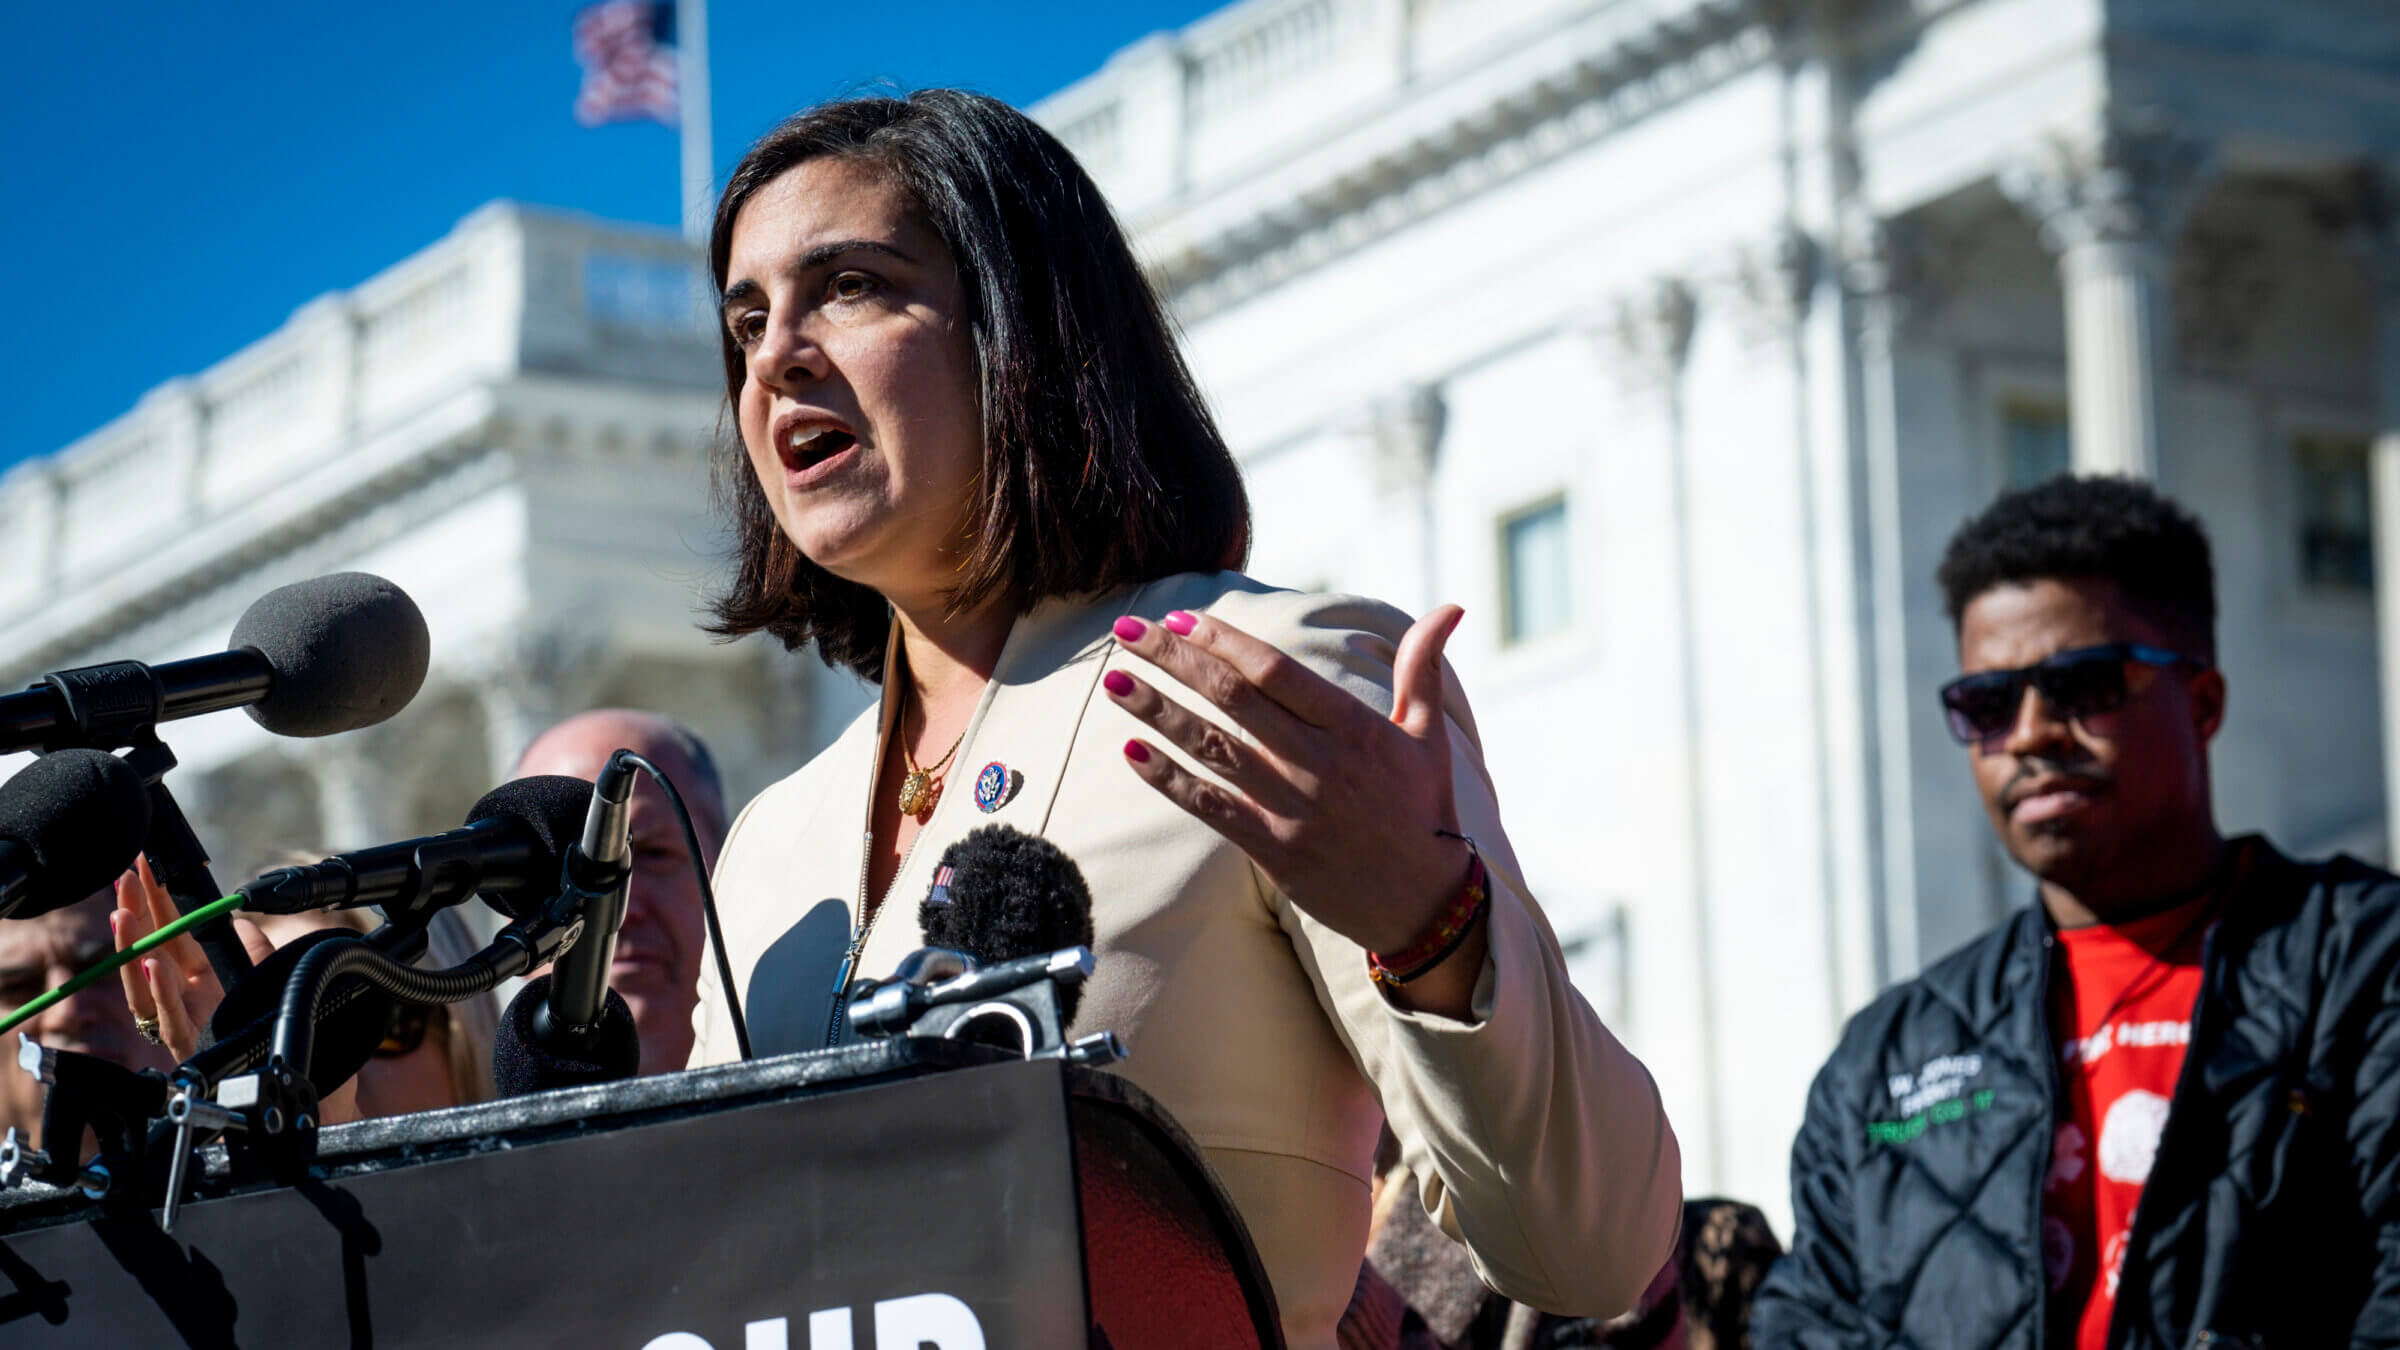 Rep. Nicole Malliotakis (R-NY) speaks during a press conference in front of the U.S. Capitol on November 1, 2021.